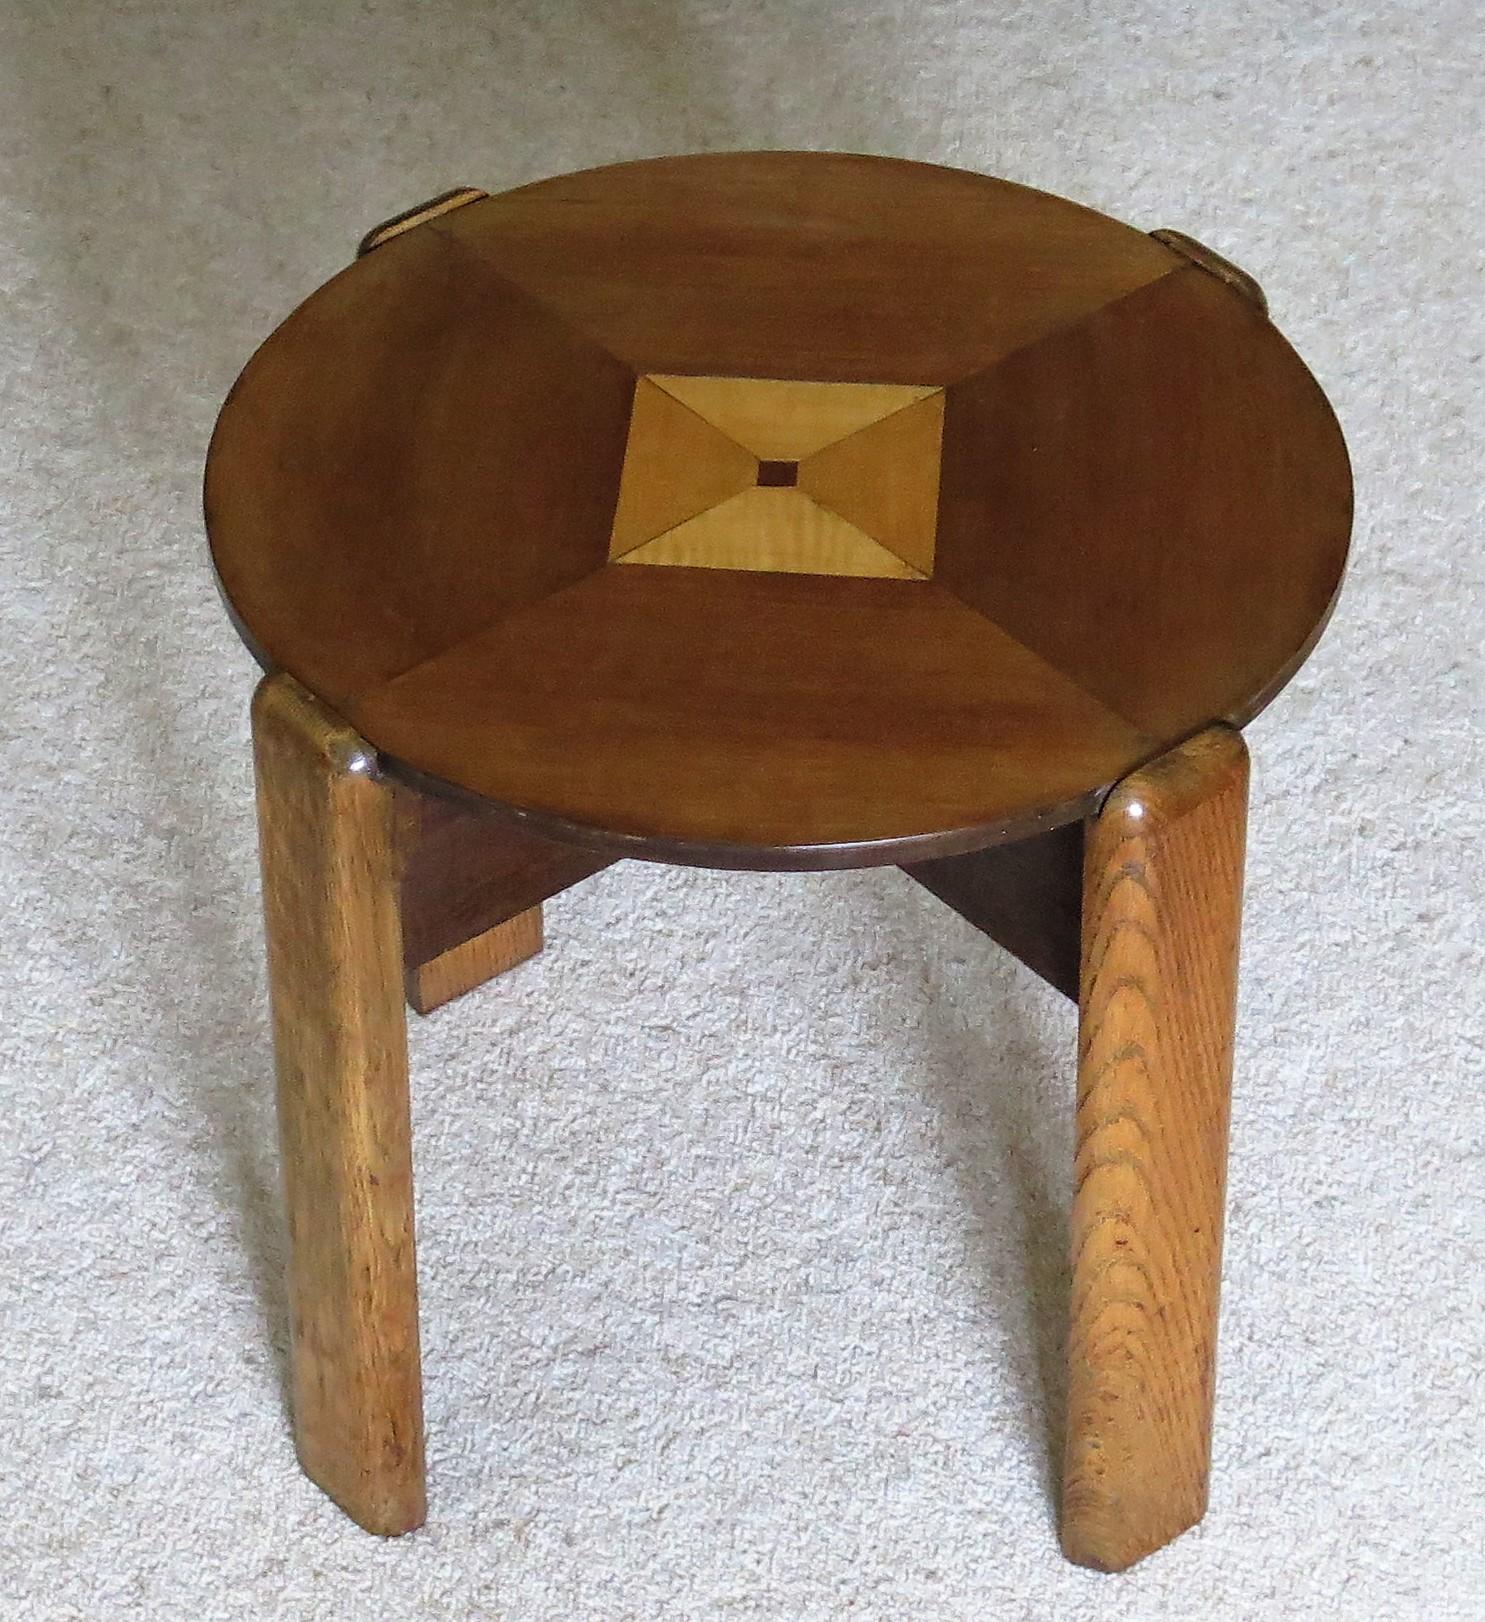 Hand-Crafted Art Deco Period Occasional Table with Quarter Veneered Top and Oak Legs, Ca 1930 For Sale